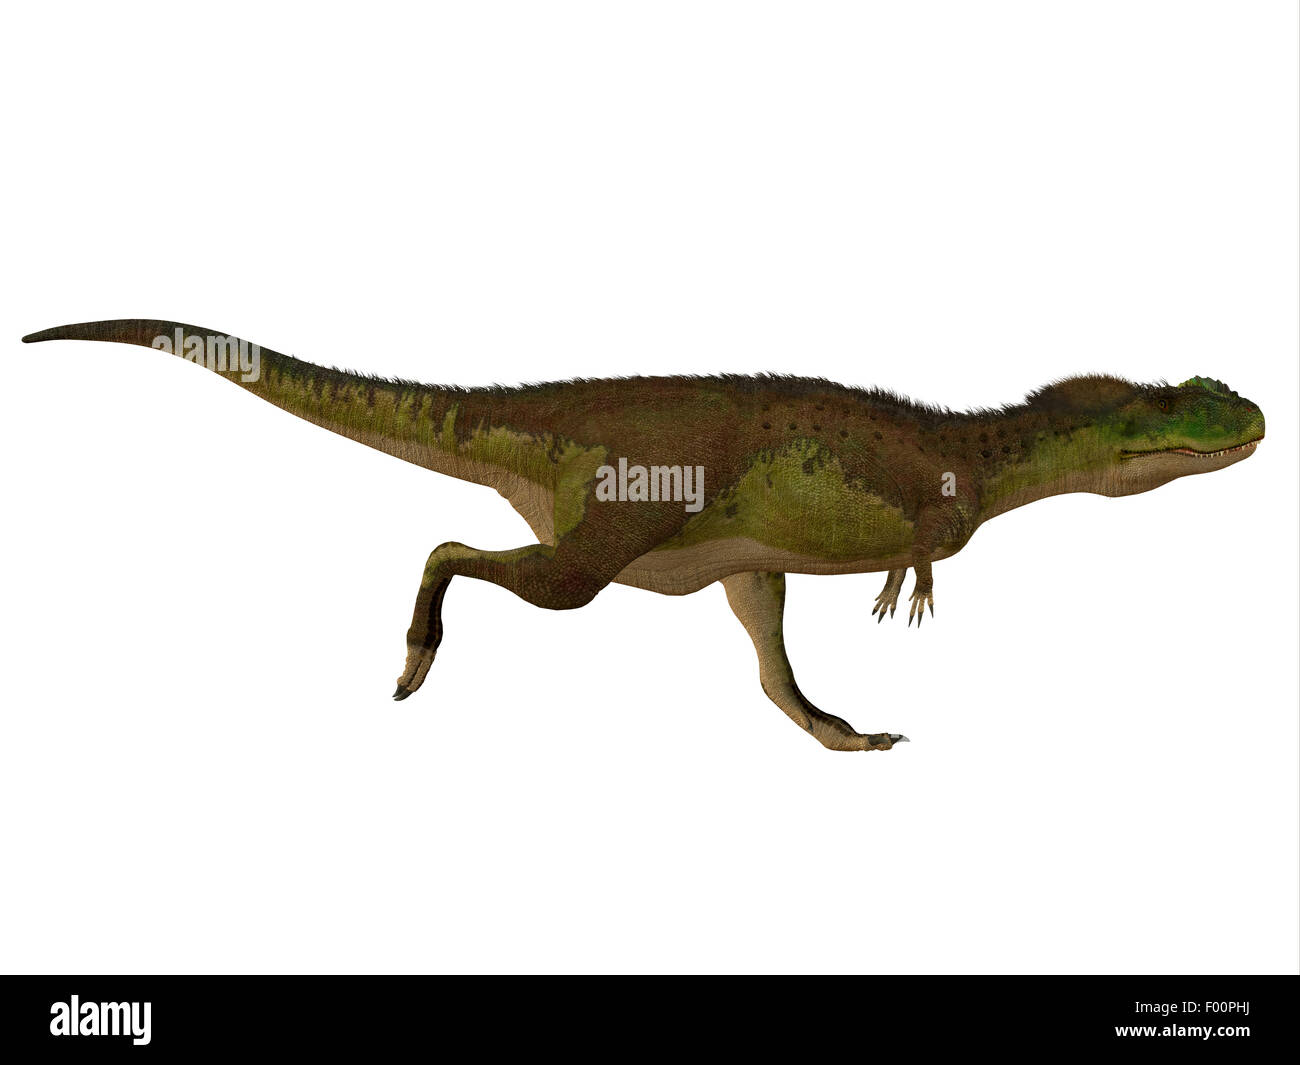 Dino Cut Out Stock Images & Pictures - Alamy